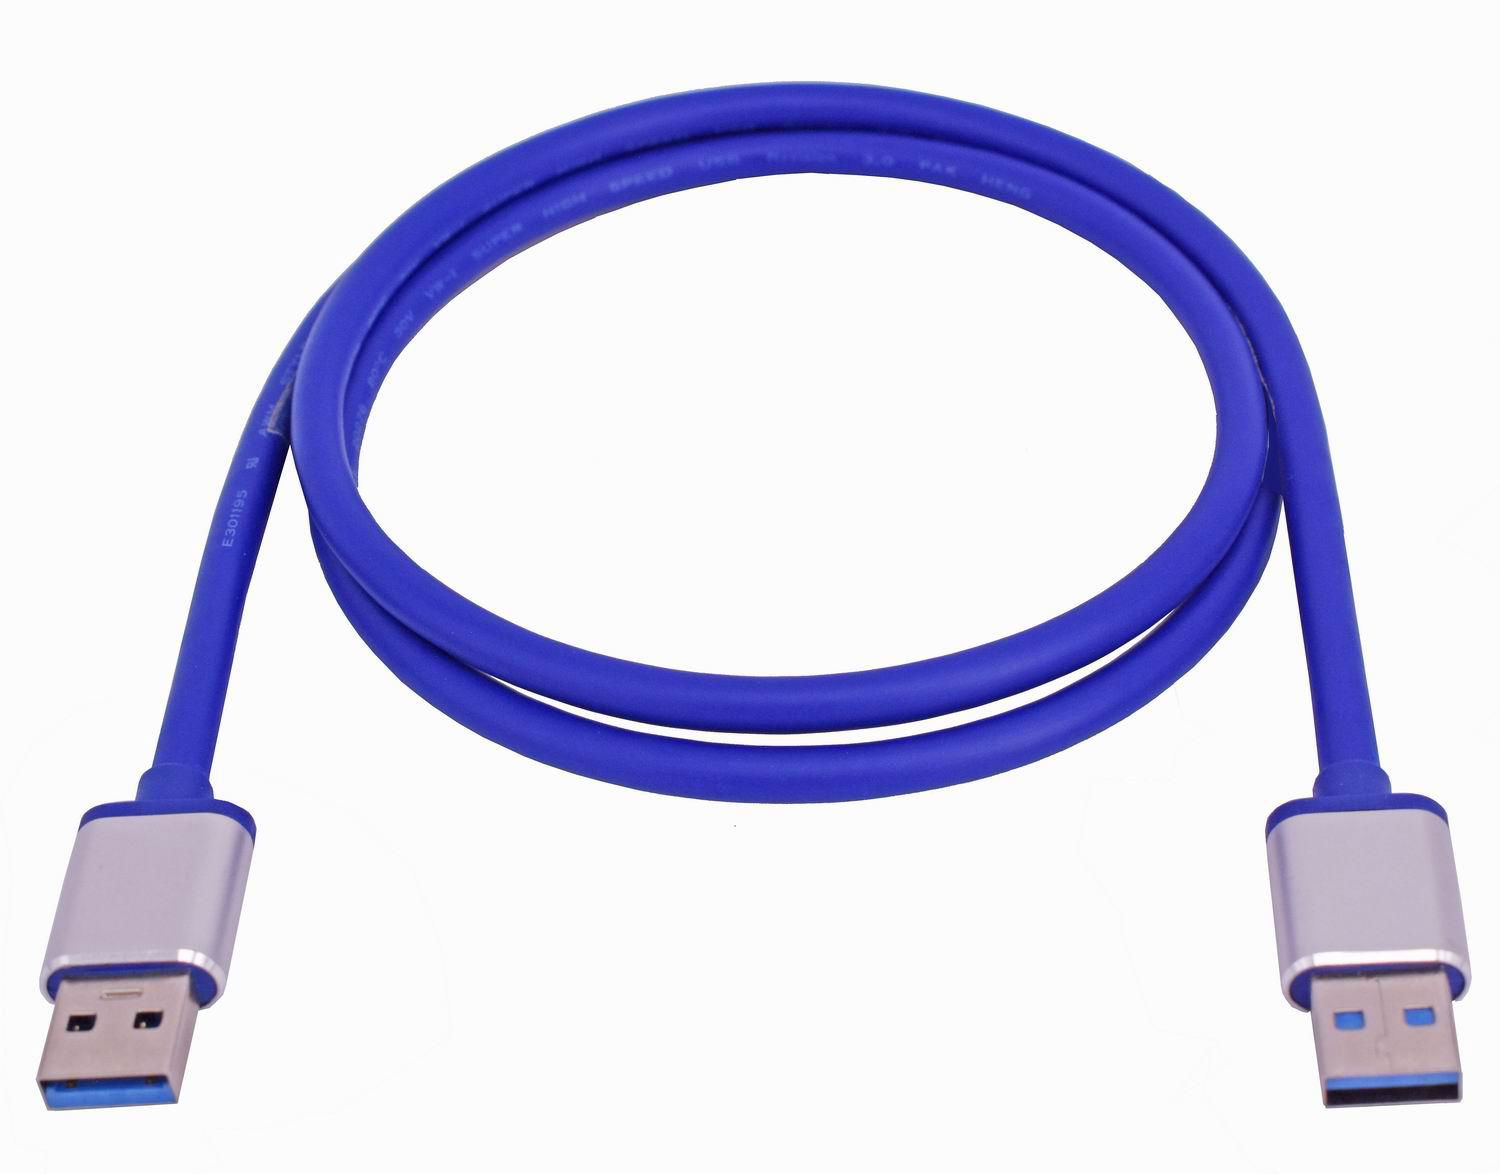 USB3.0 high quality supper speed data cable 2